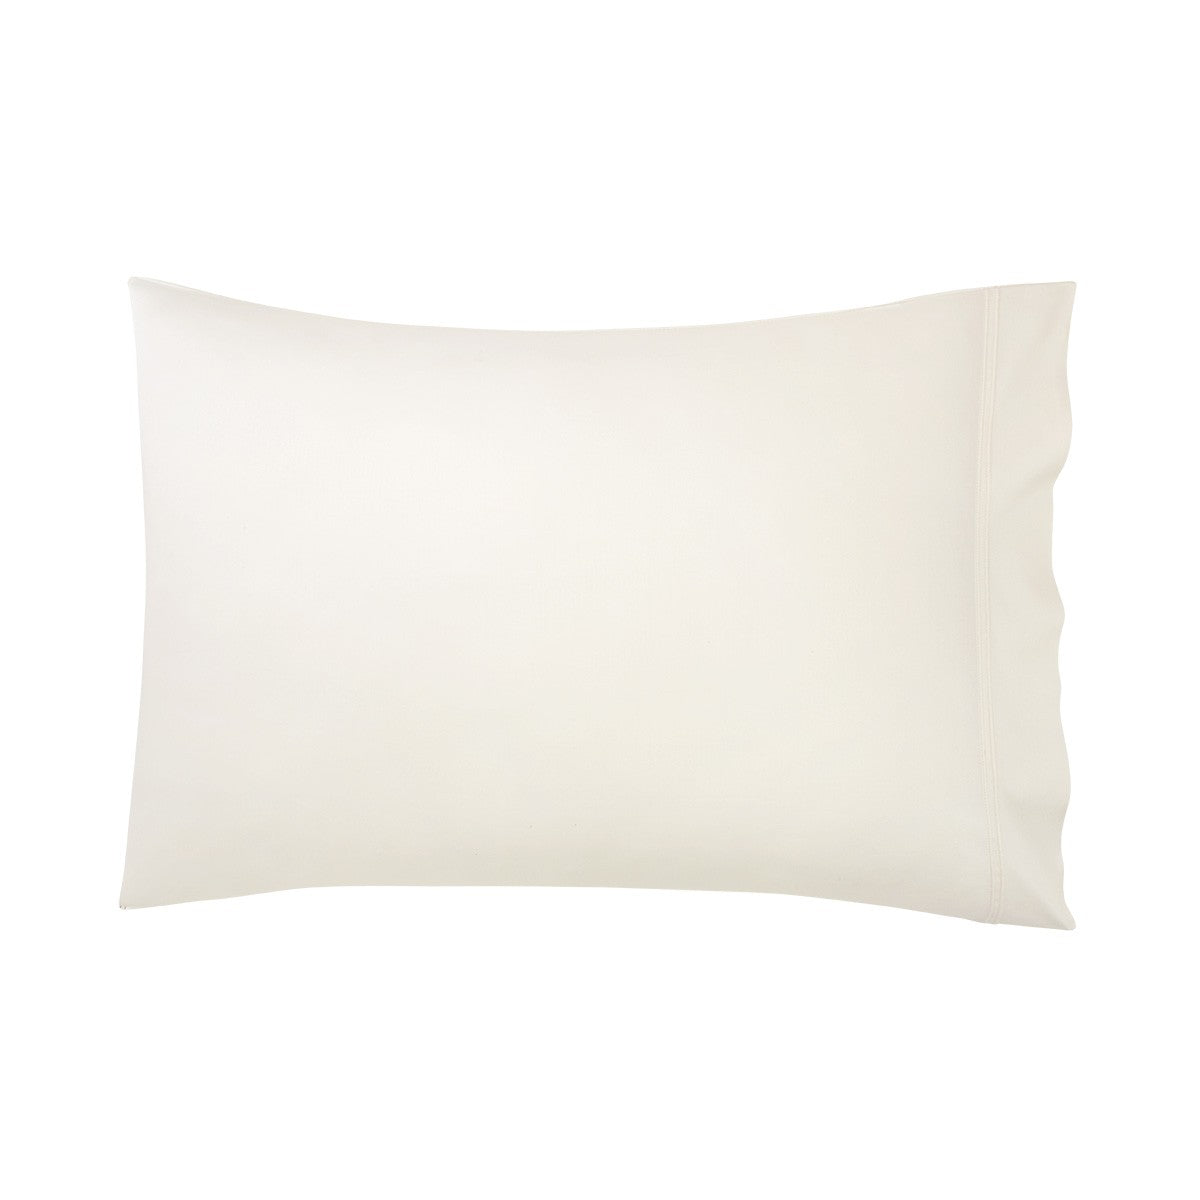 shop-the-official-shop-of-yves-delorme-triomphe-bedding-collection-online-now_9.jpg